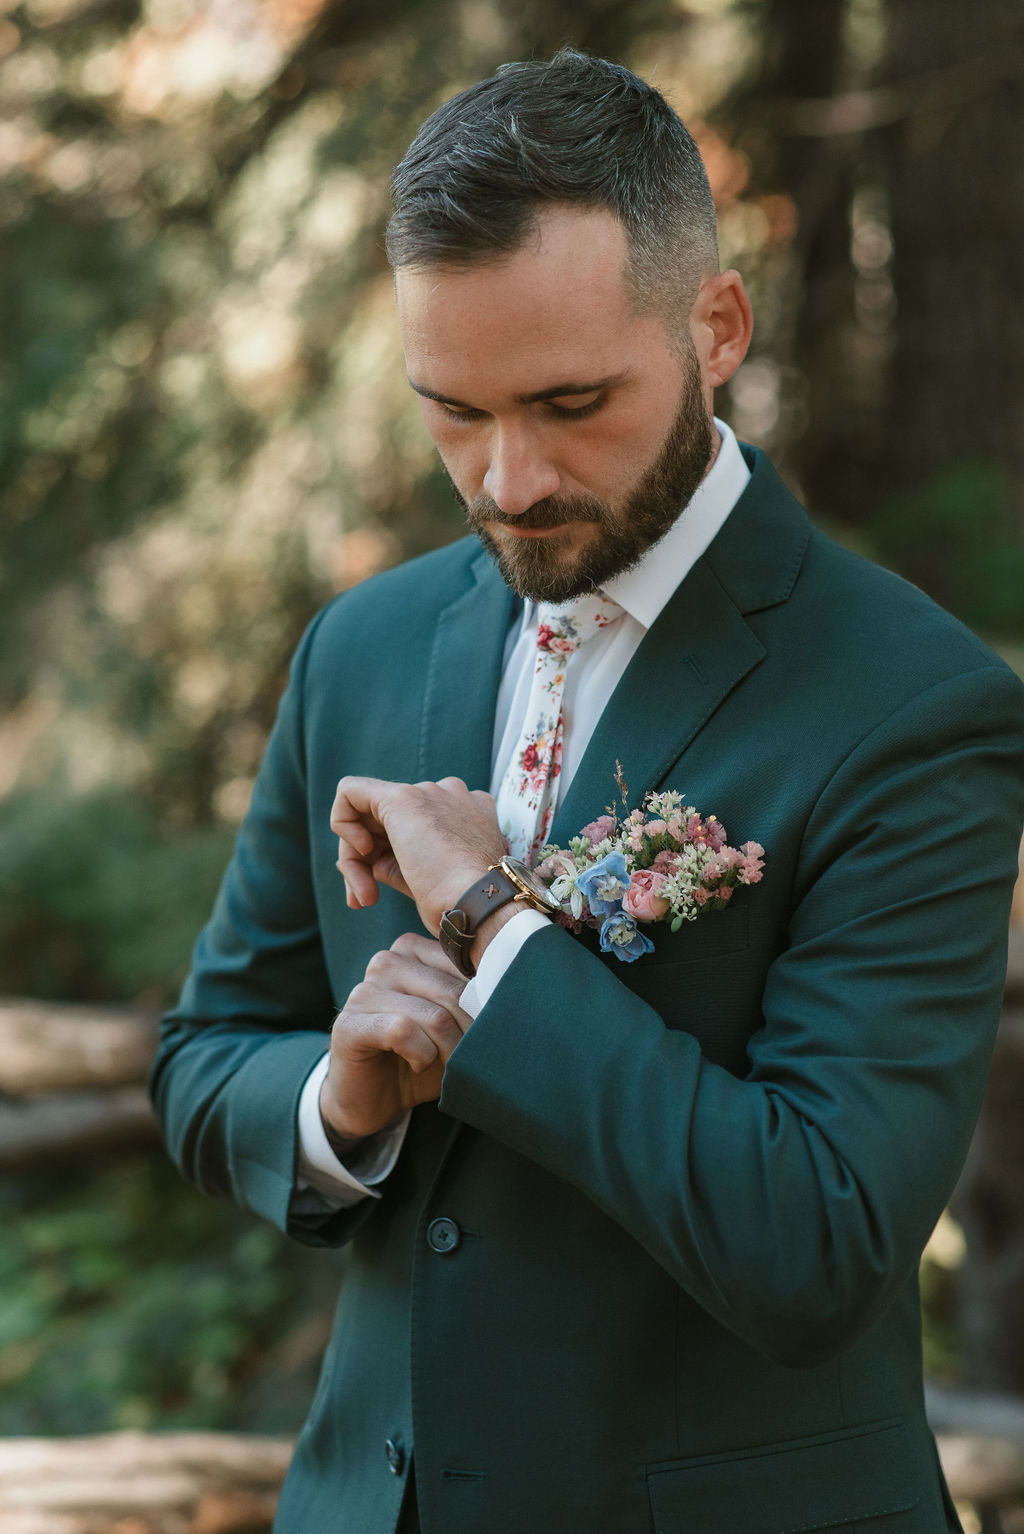 groom portrait, wearing a teal suit, showing their personalized wedding details